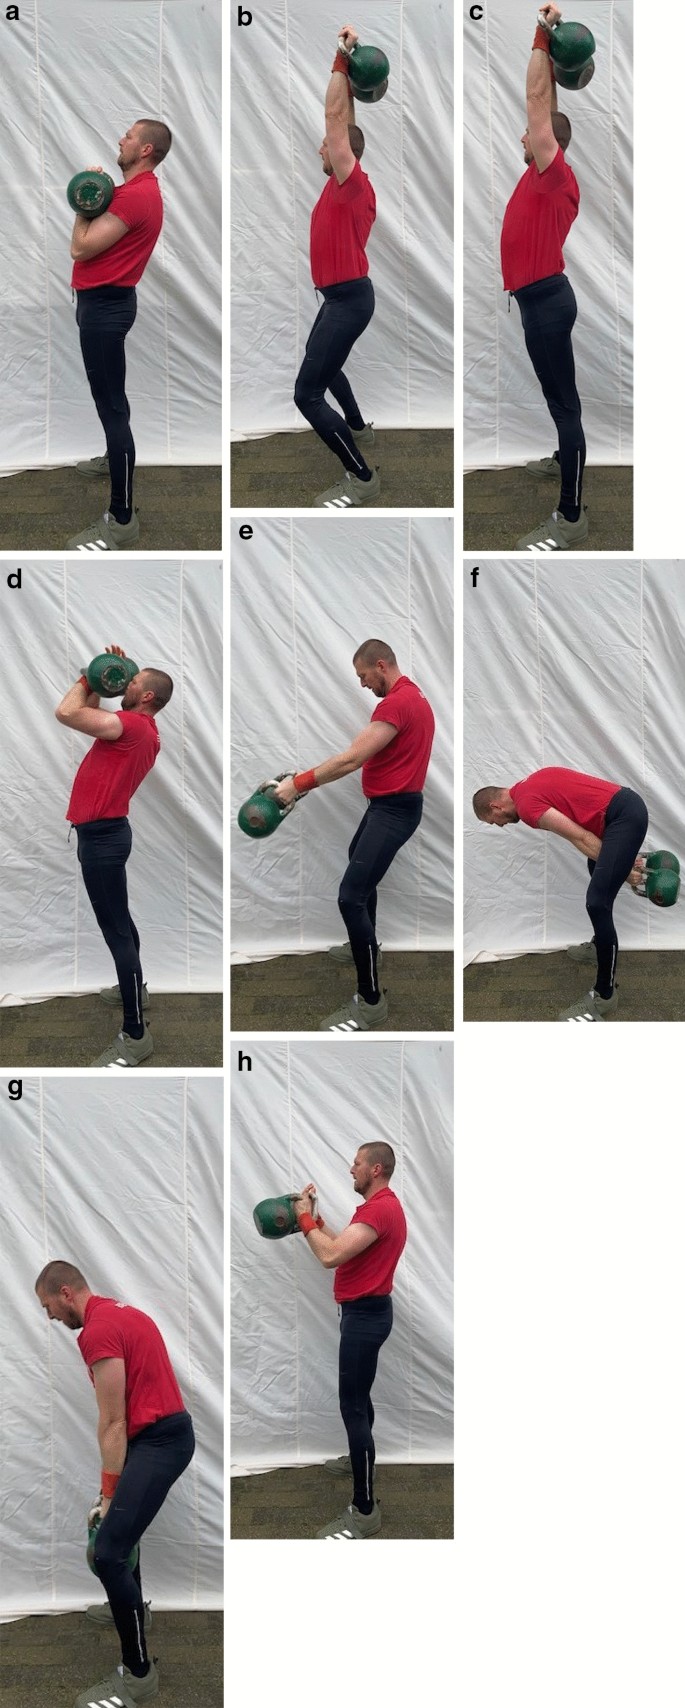 Video tracking and force platform measurements of the kettlebell lifts long  cycle and snatch | SN Applied Sciences